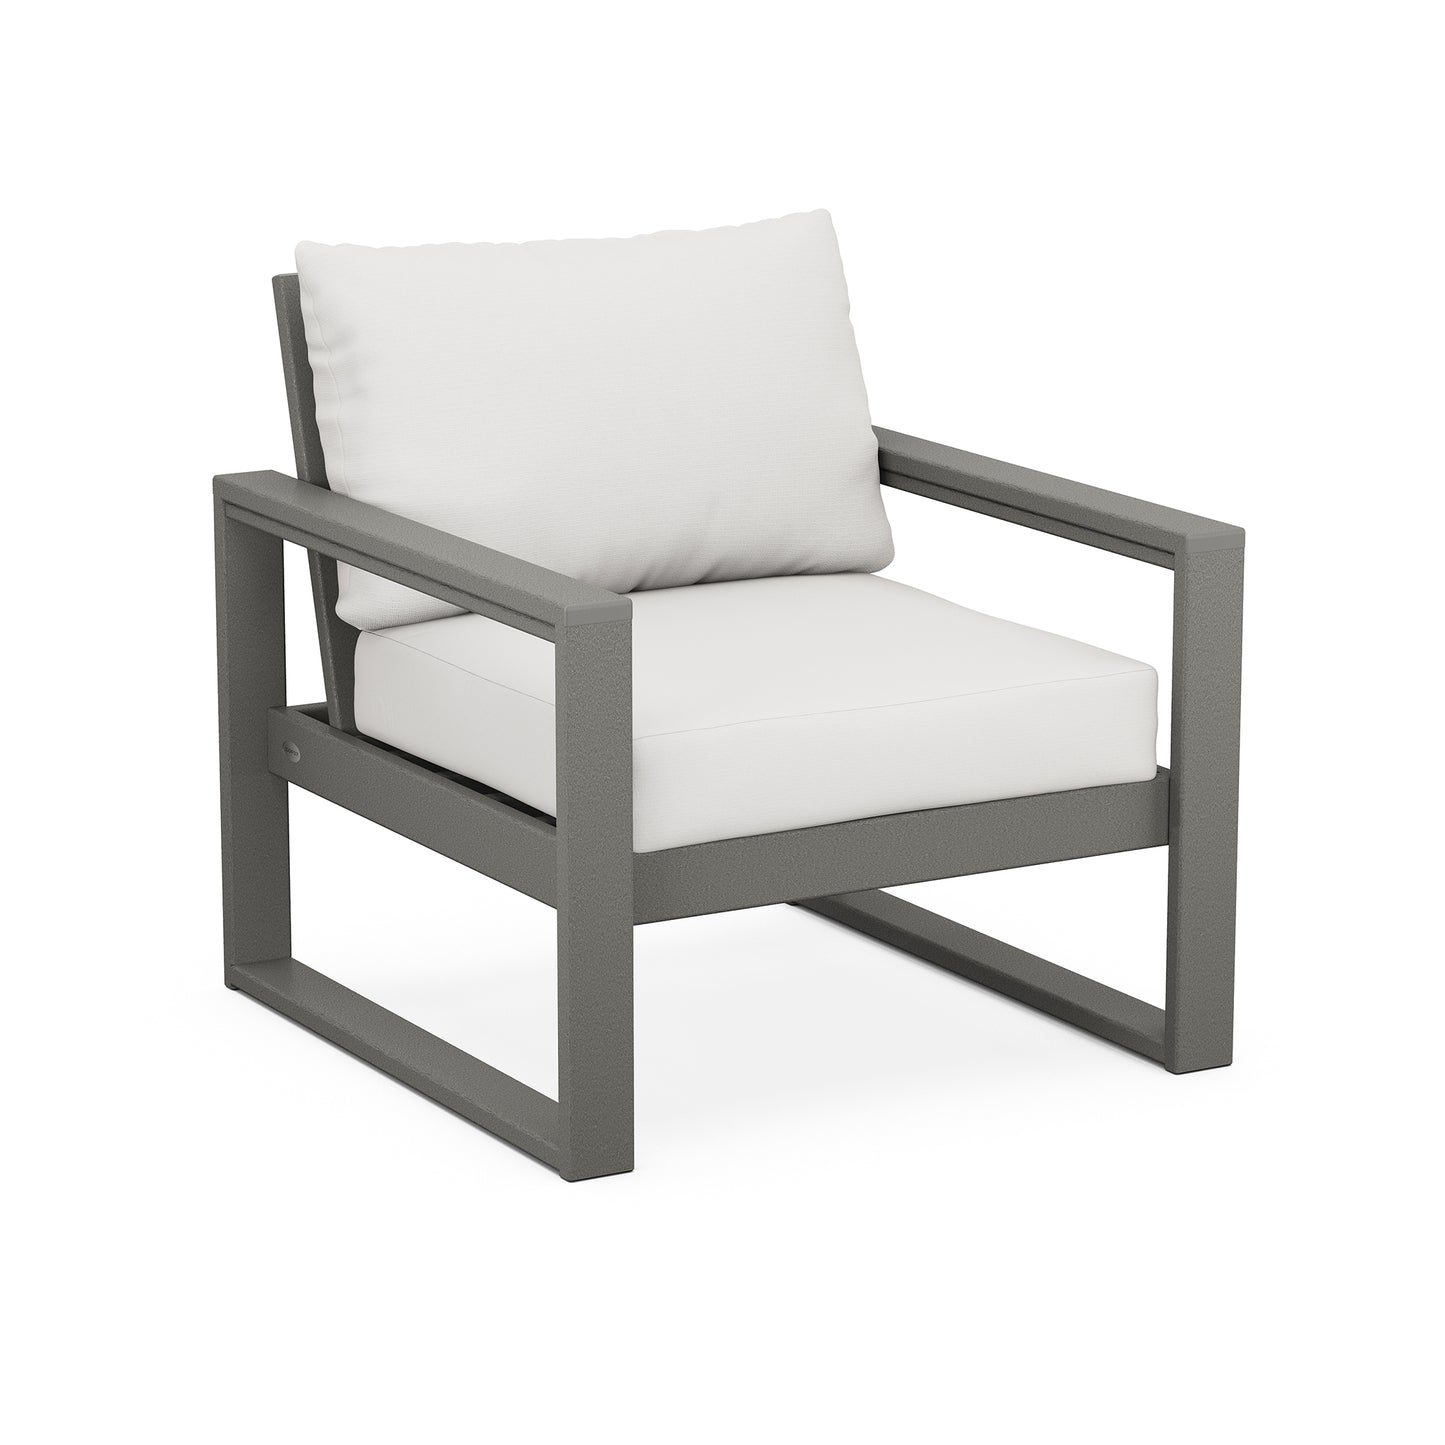 Contemporary outdoor armchair with a minimalist gray frame and white cushions, isolated on a white background - POLYWOOD EDGE Club Chair from POLYWOOD.